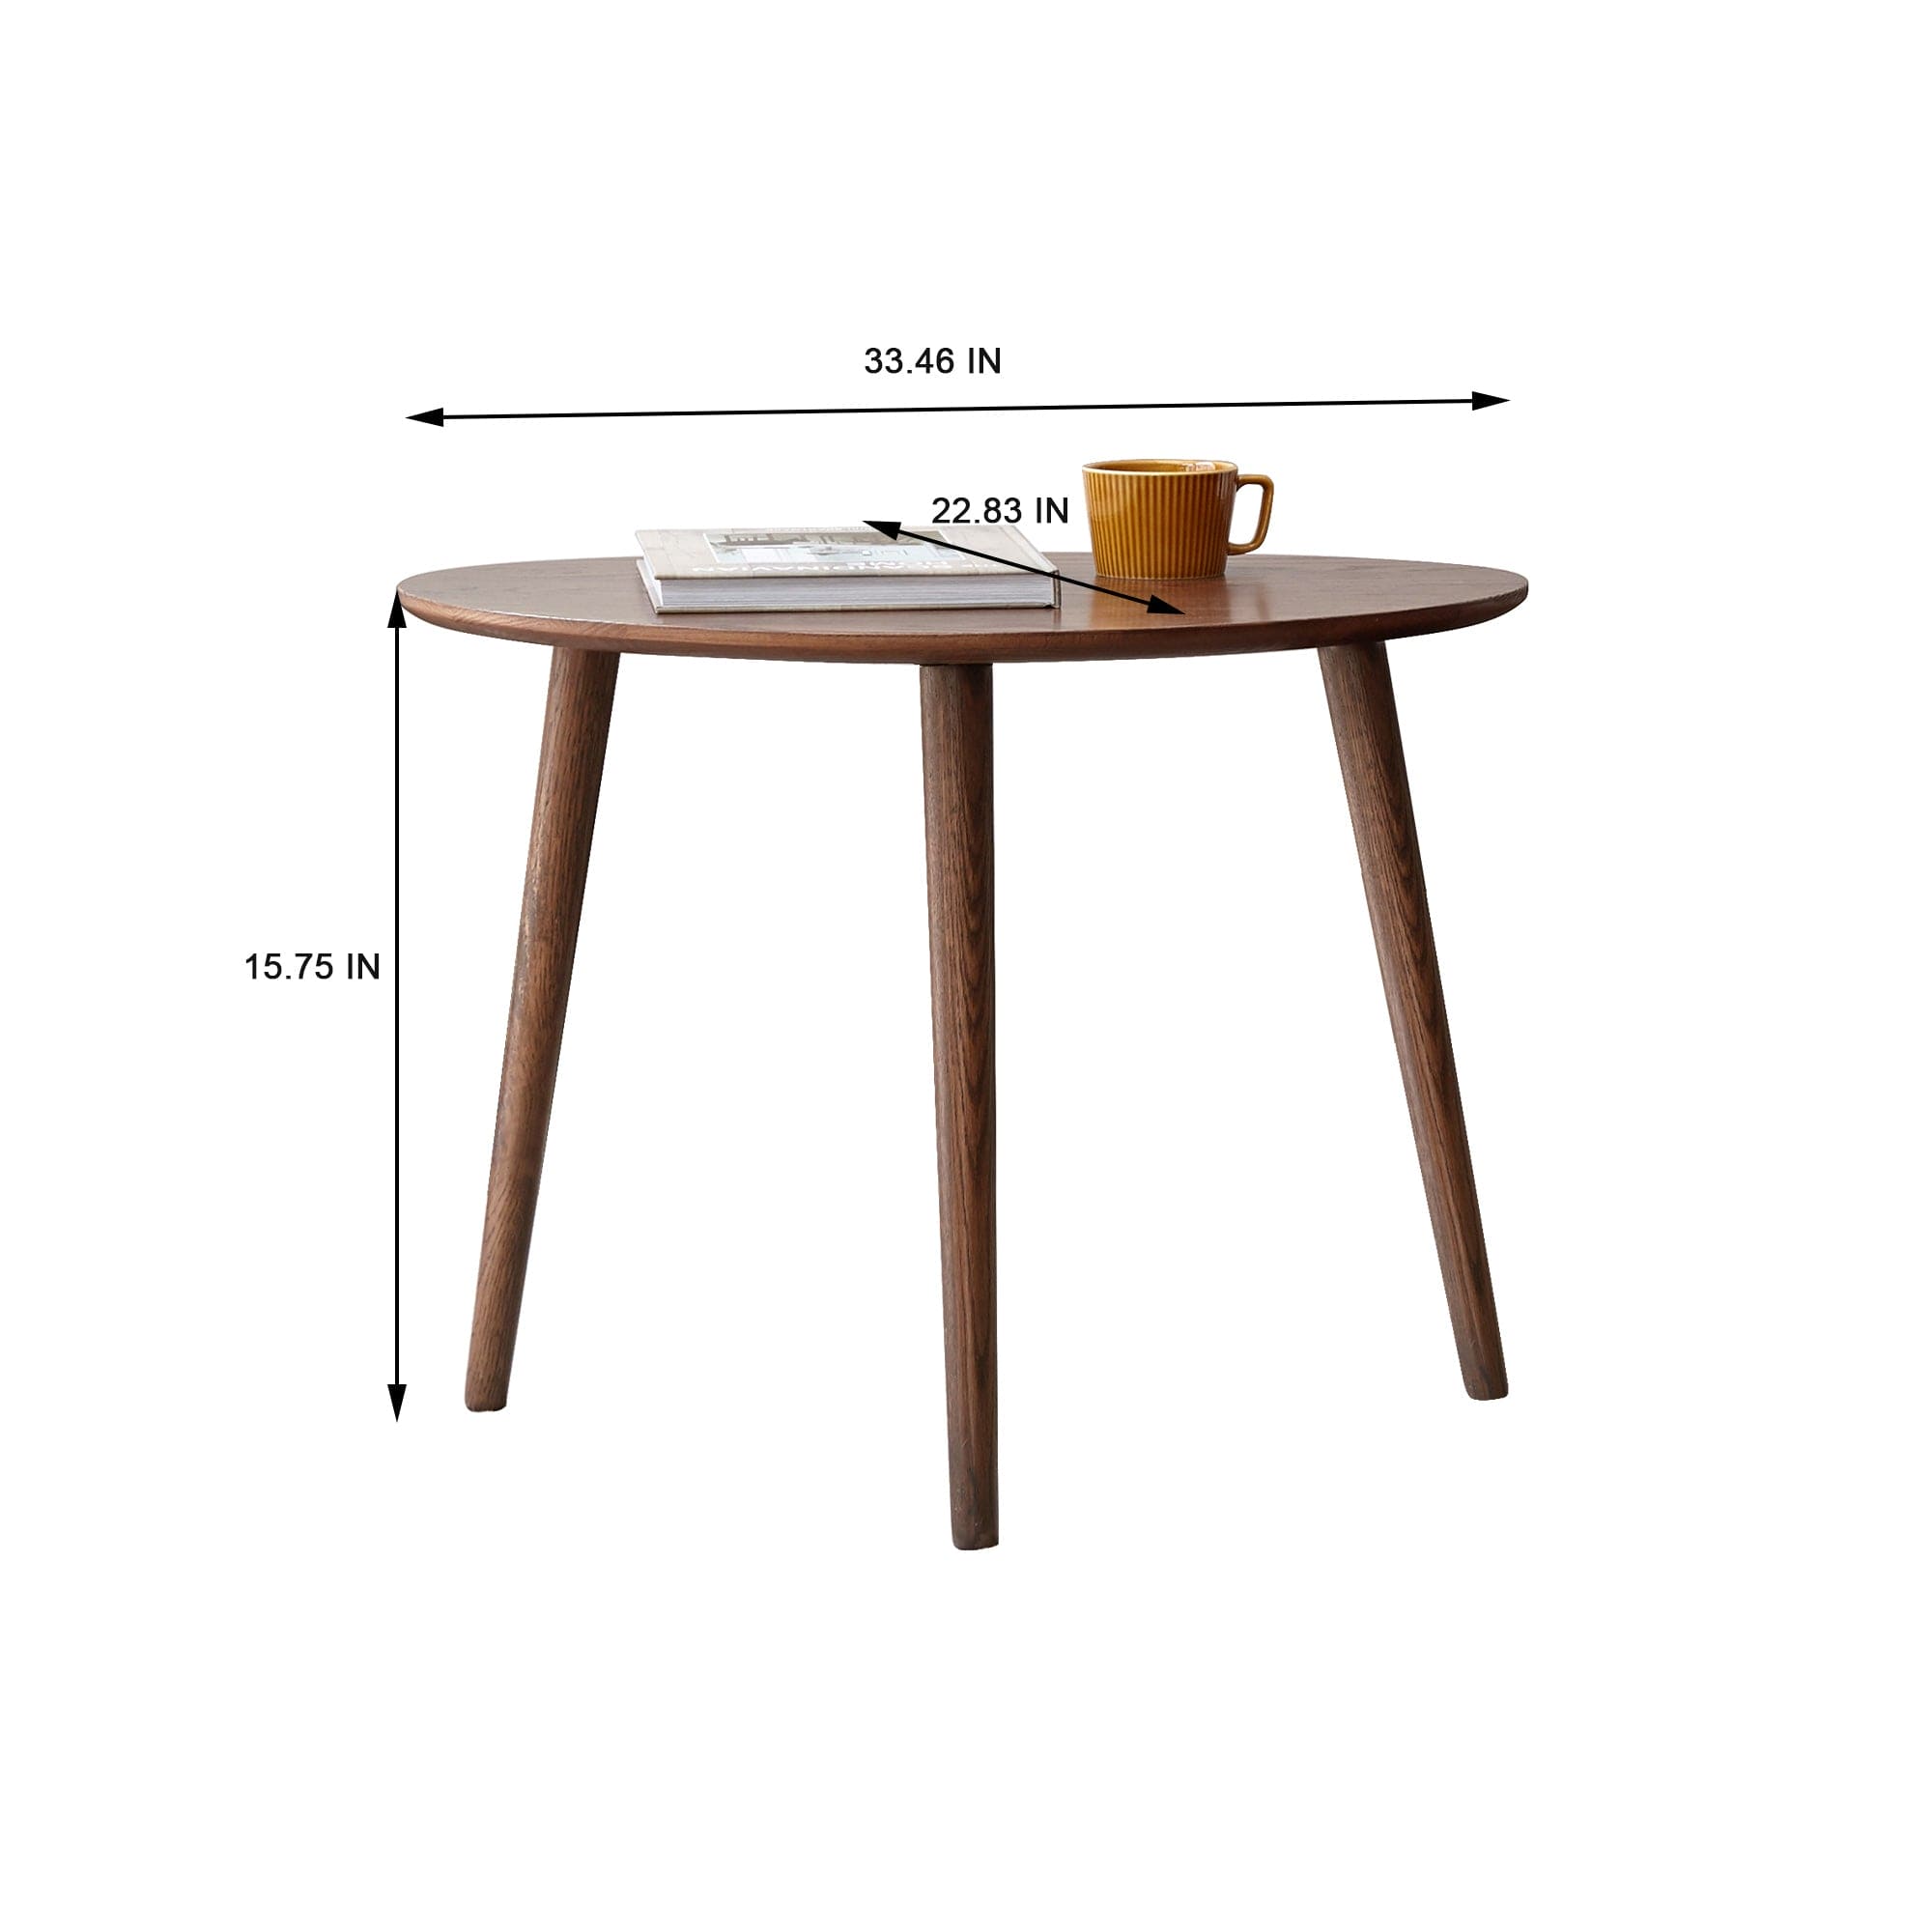 (SINGLE) Center Table Low Table 100% Solid Oak Wood Top Plate Desk Pebble Shaped Natural Wooden Coffee Table Width 58 x Depth 40 x Height 85 cm Desk Work from Home Easy to Assemble